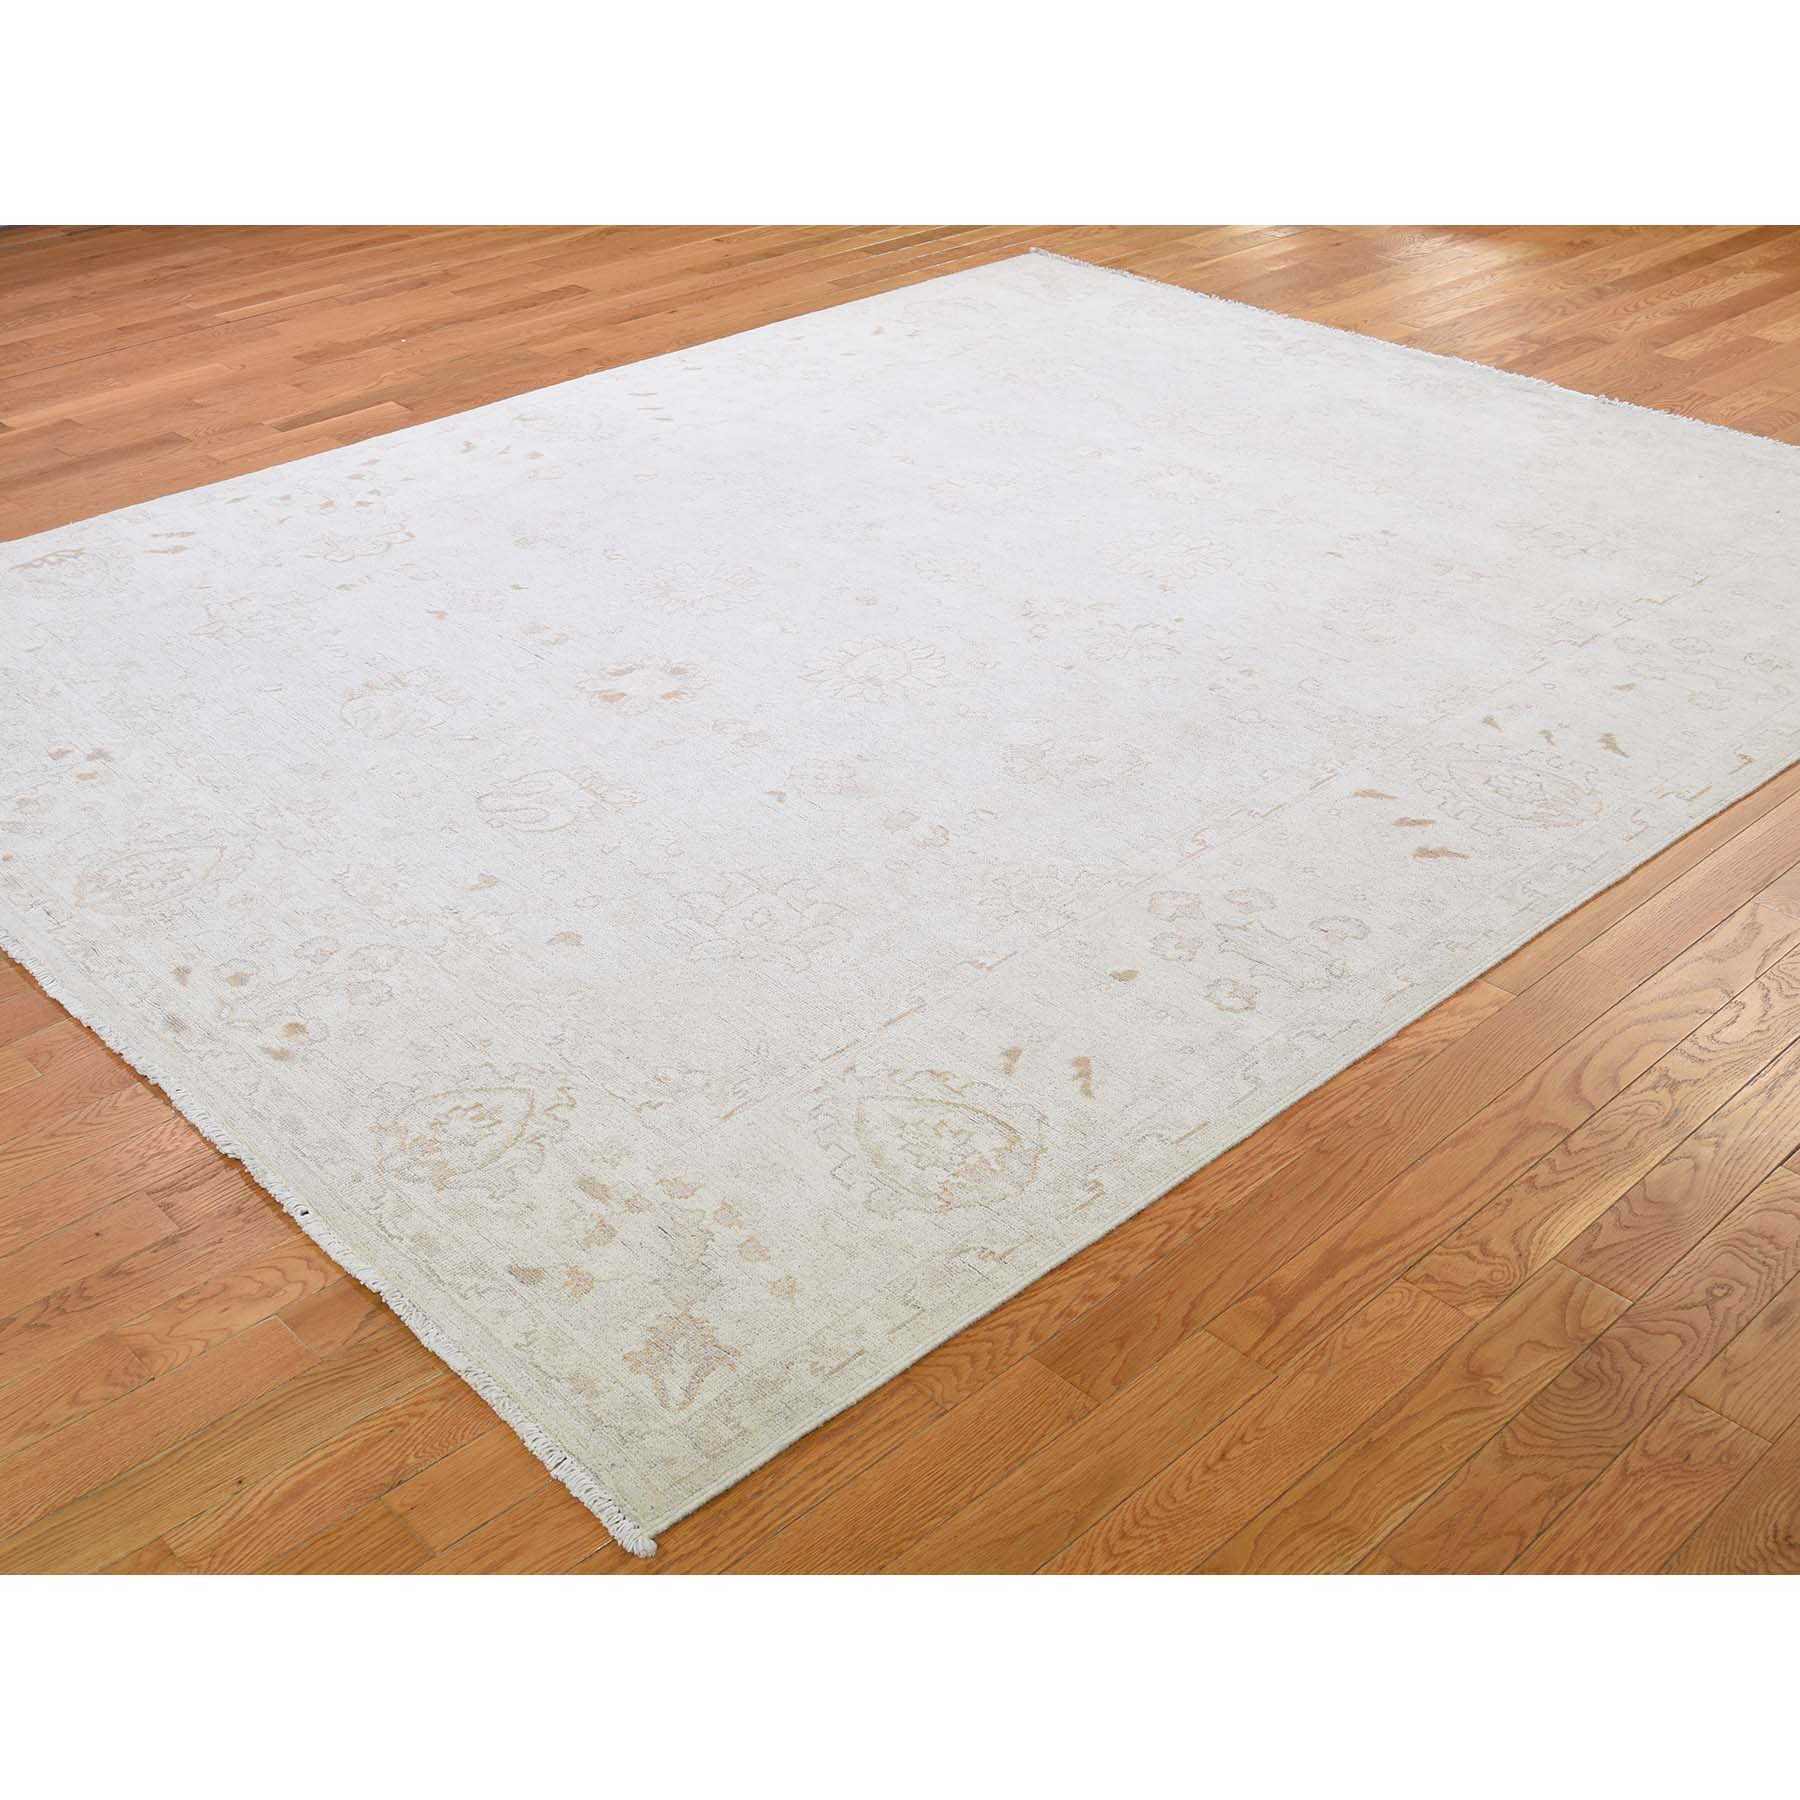 8-x9-6  White Wash Peshawar Pure Wool Hand-Knotted Oriental Rug 